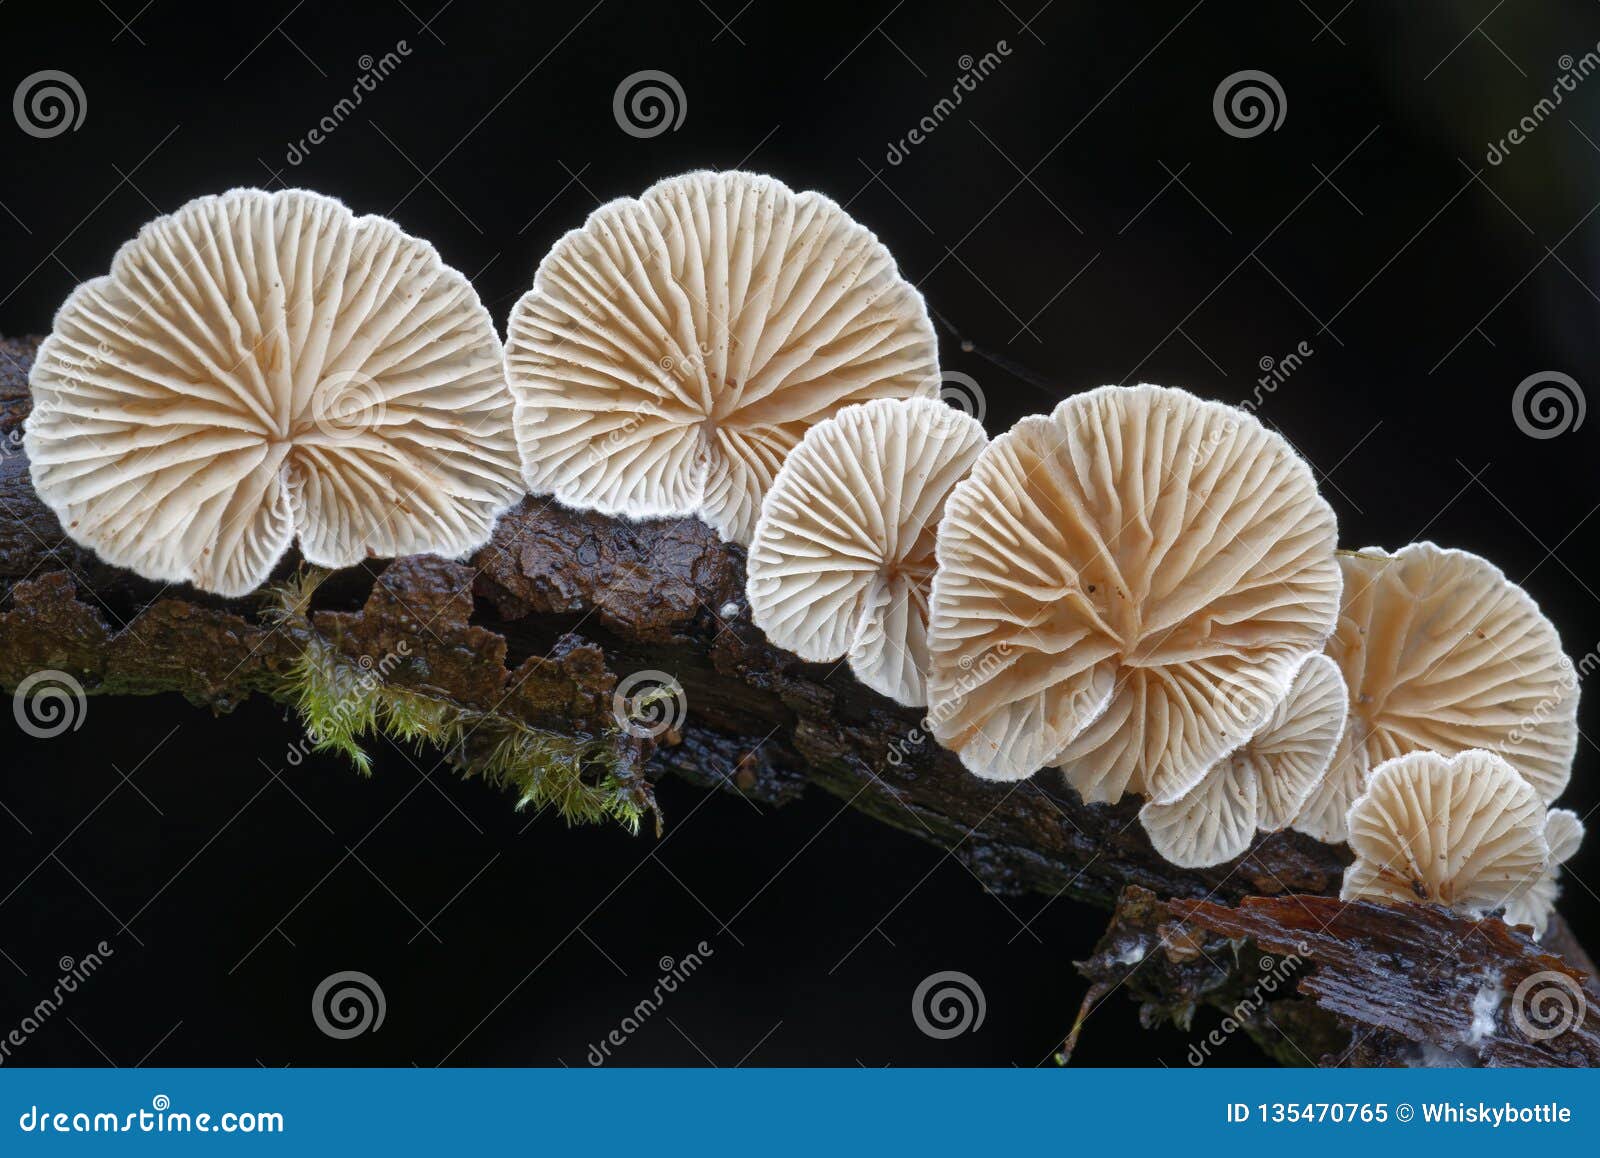 variable oysterling fungus